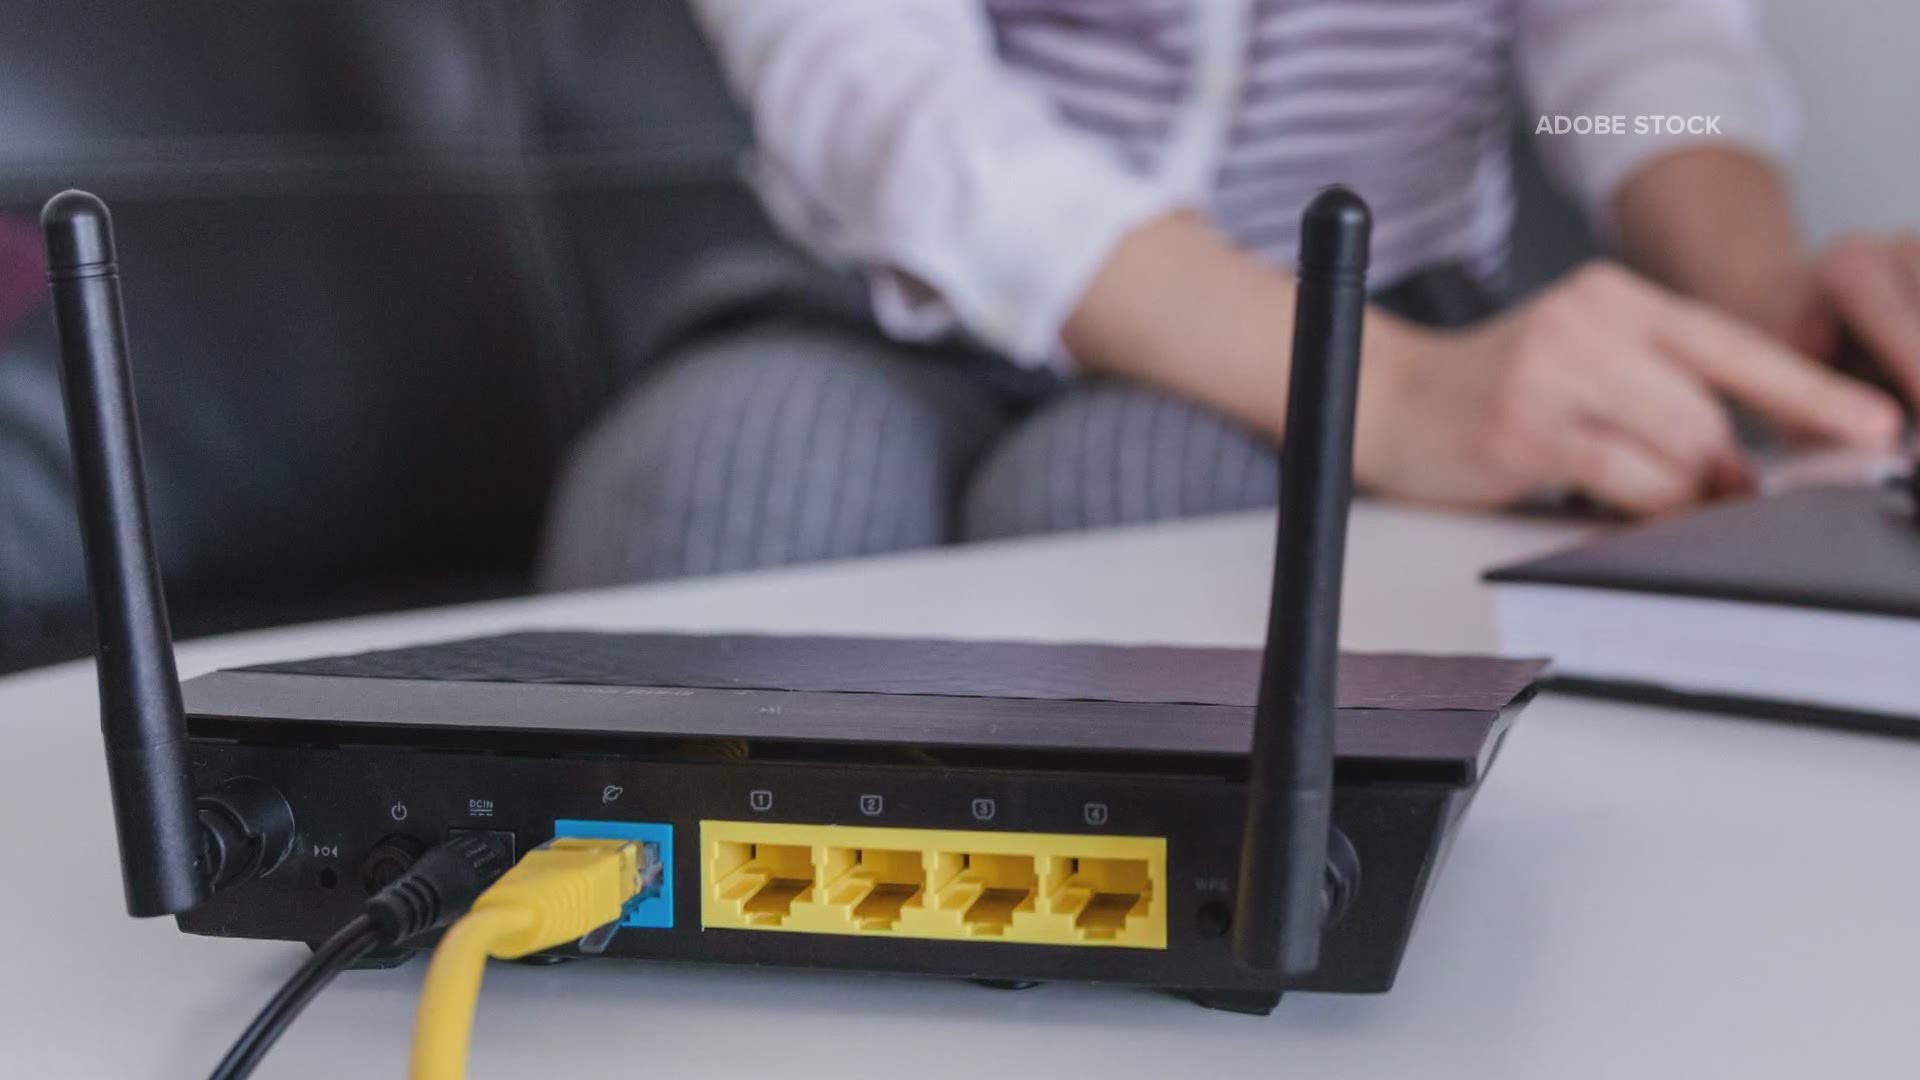 Rich Brooks has some recommendations for keeping a strong internet connection with many kids beginning school at home.